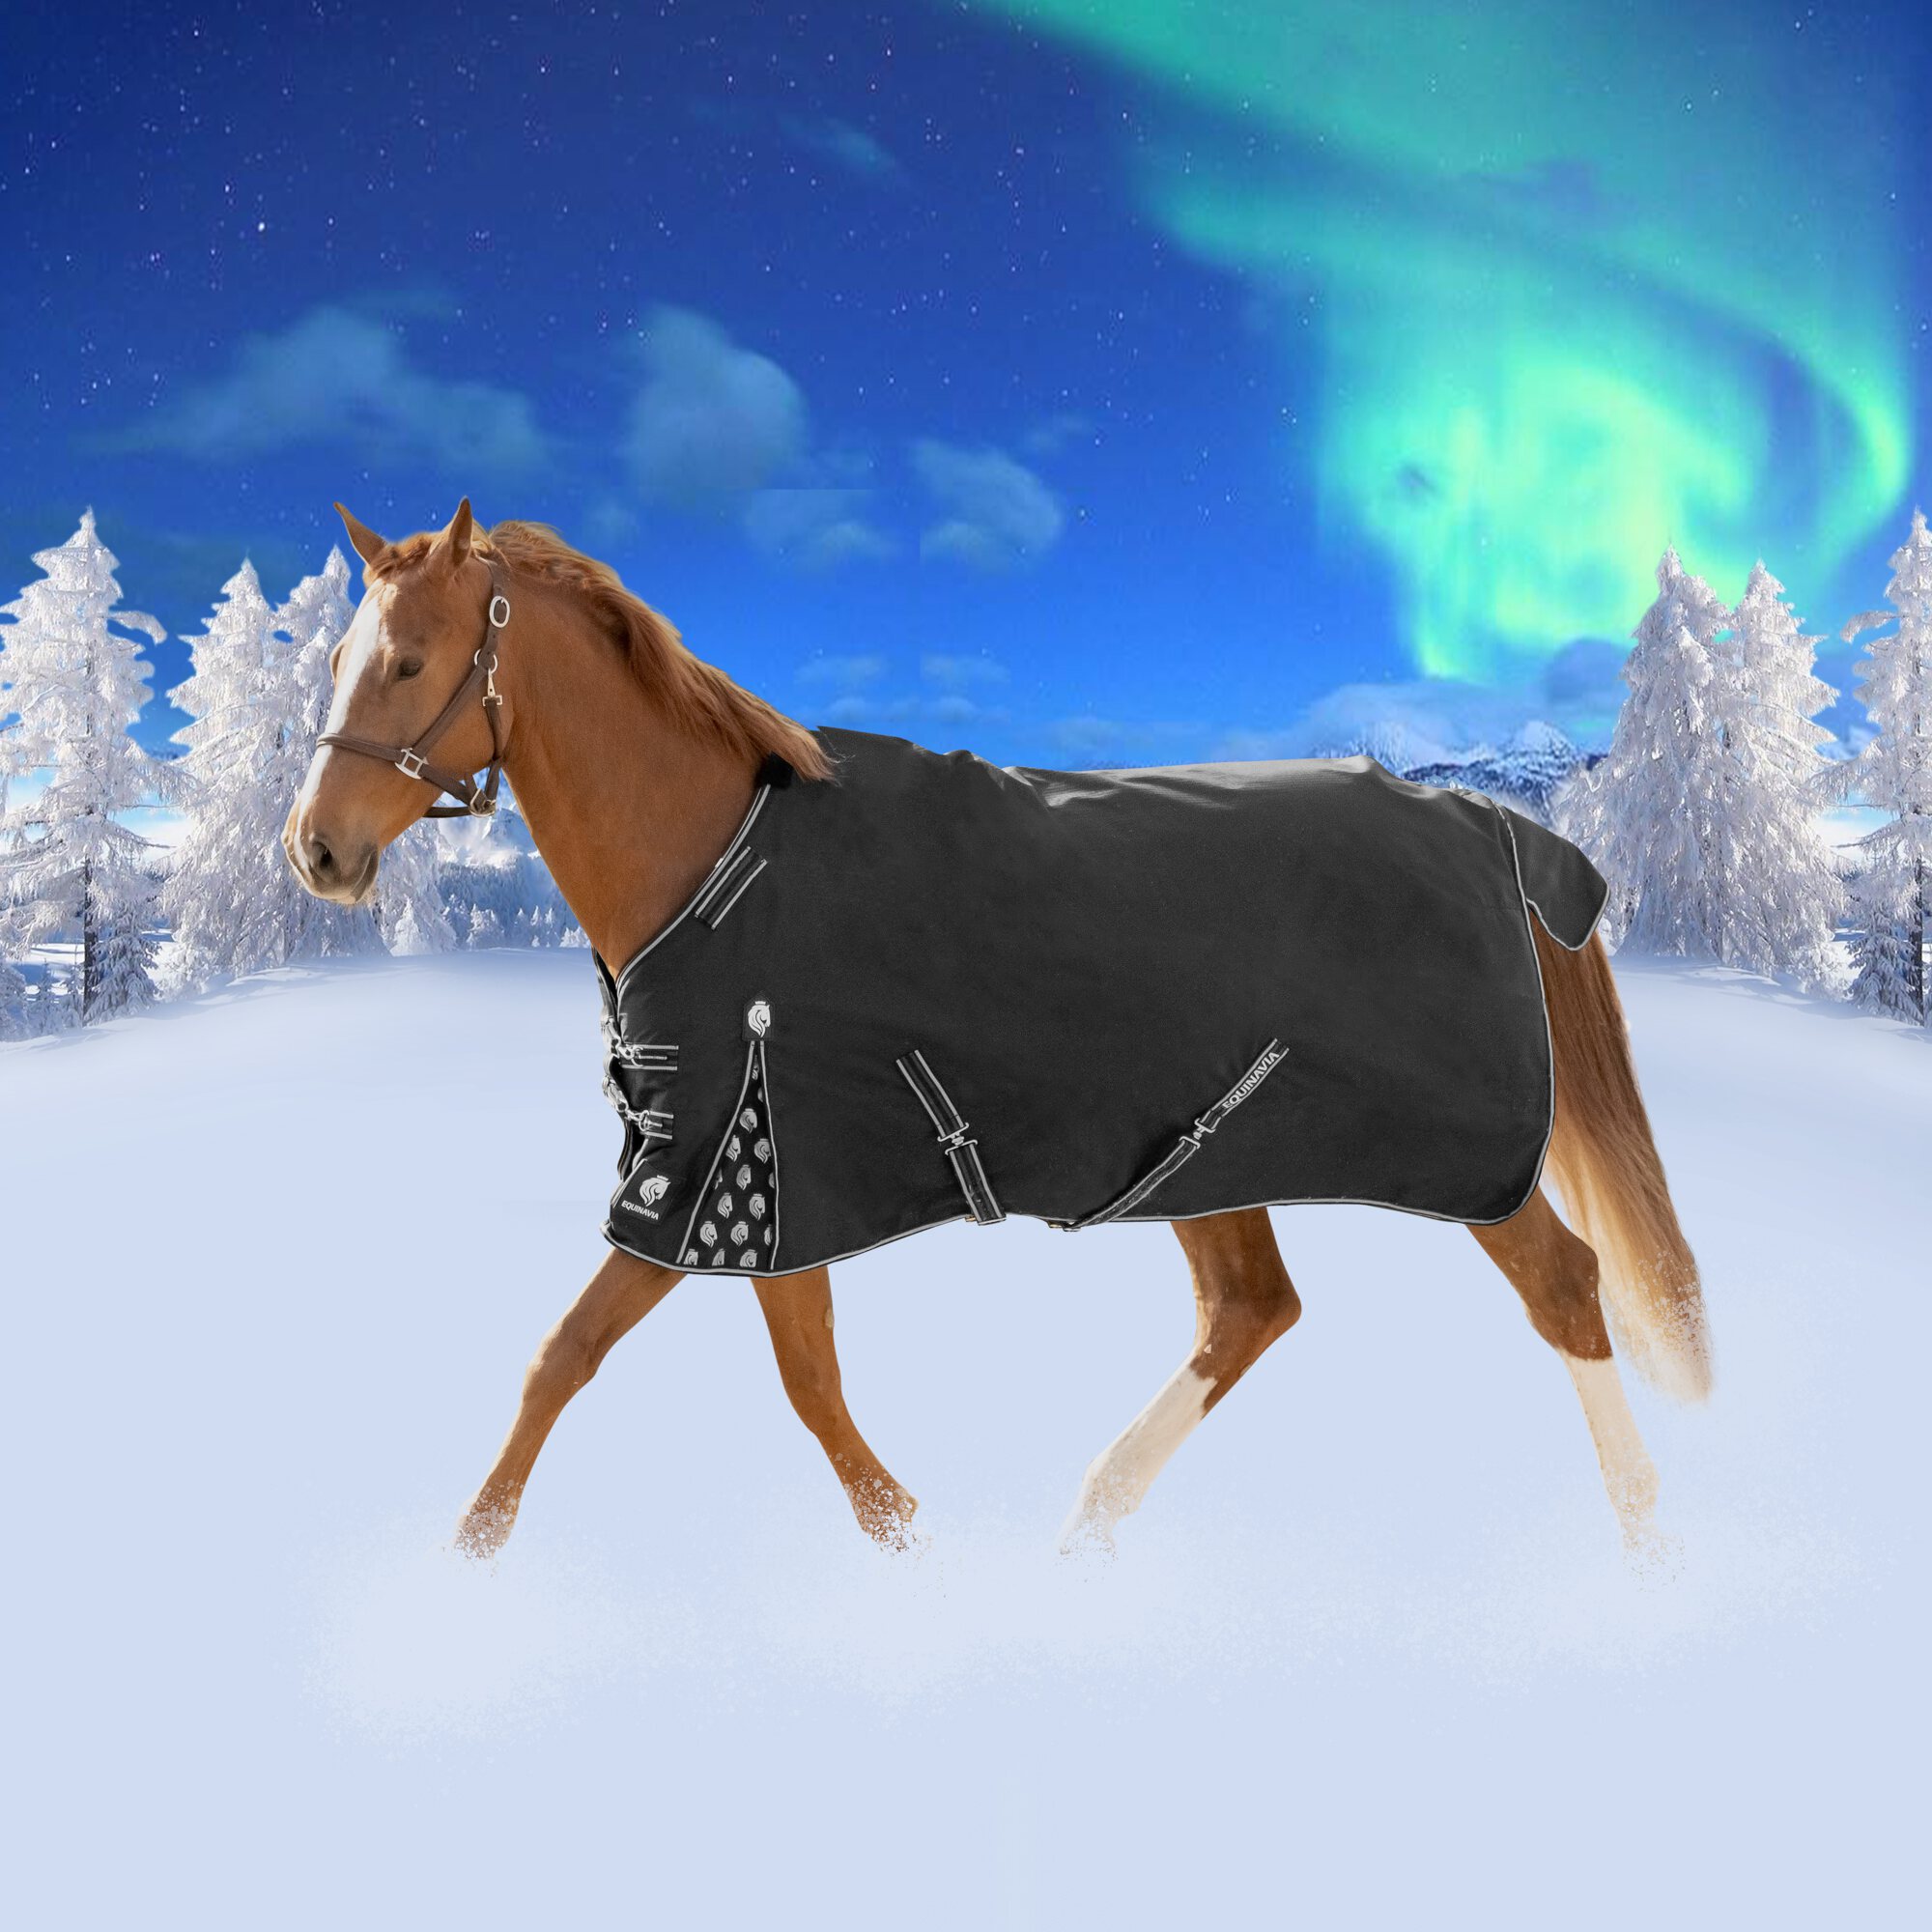 Equinavia Norse Light Weight Turnout Blanket 100g